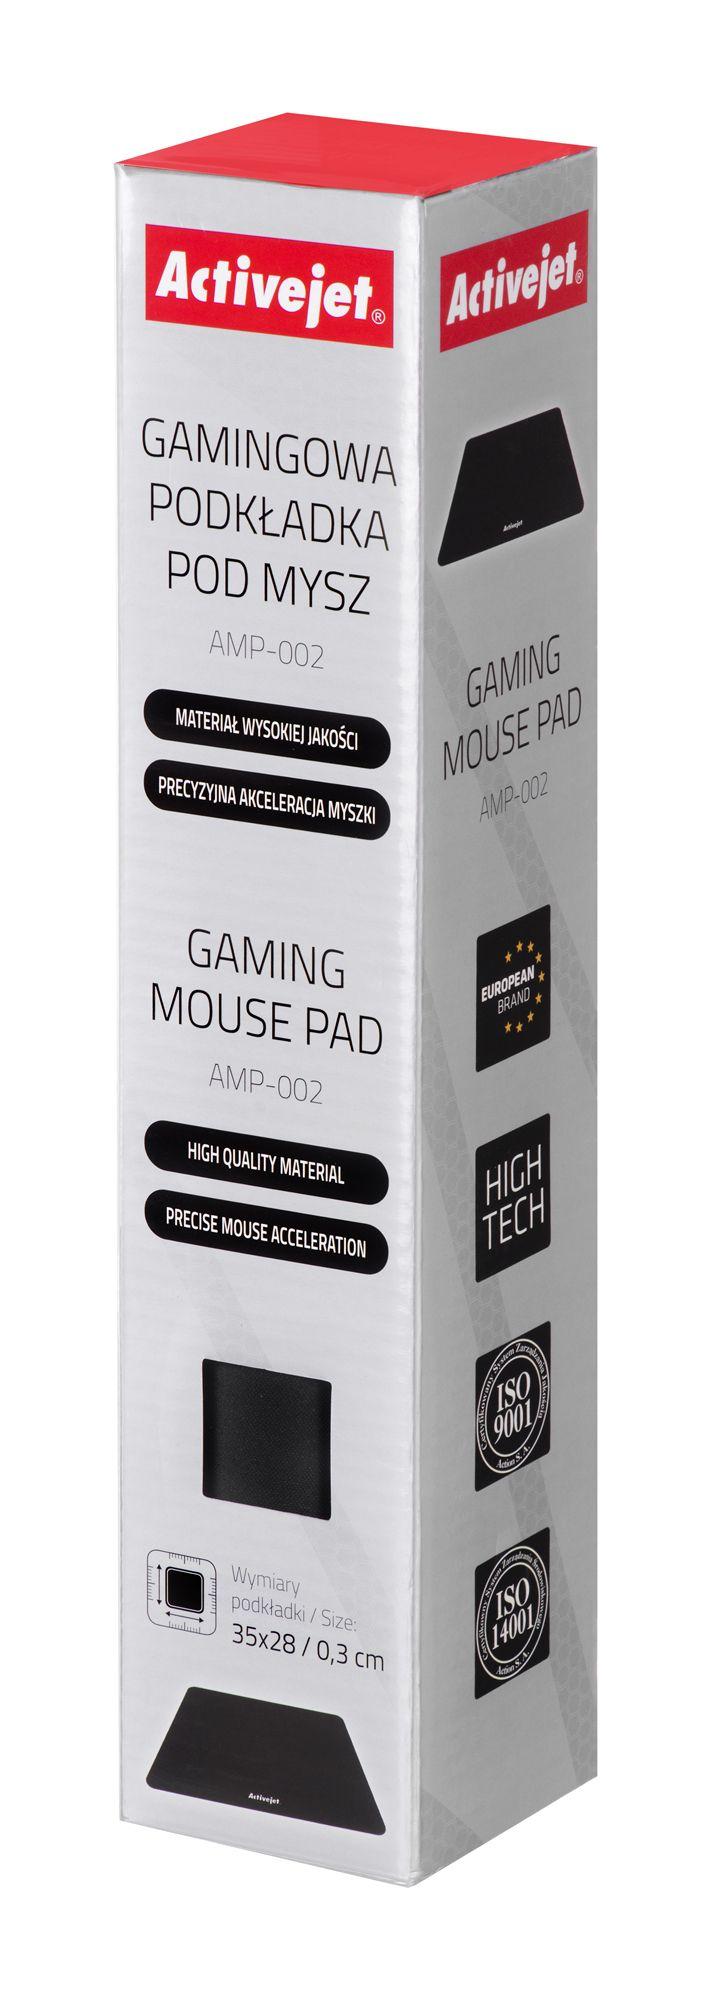 Activejet Gaming mouse pad AMP-002